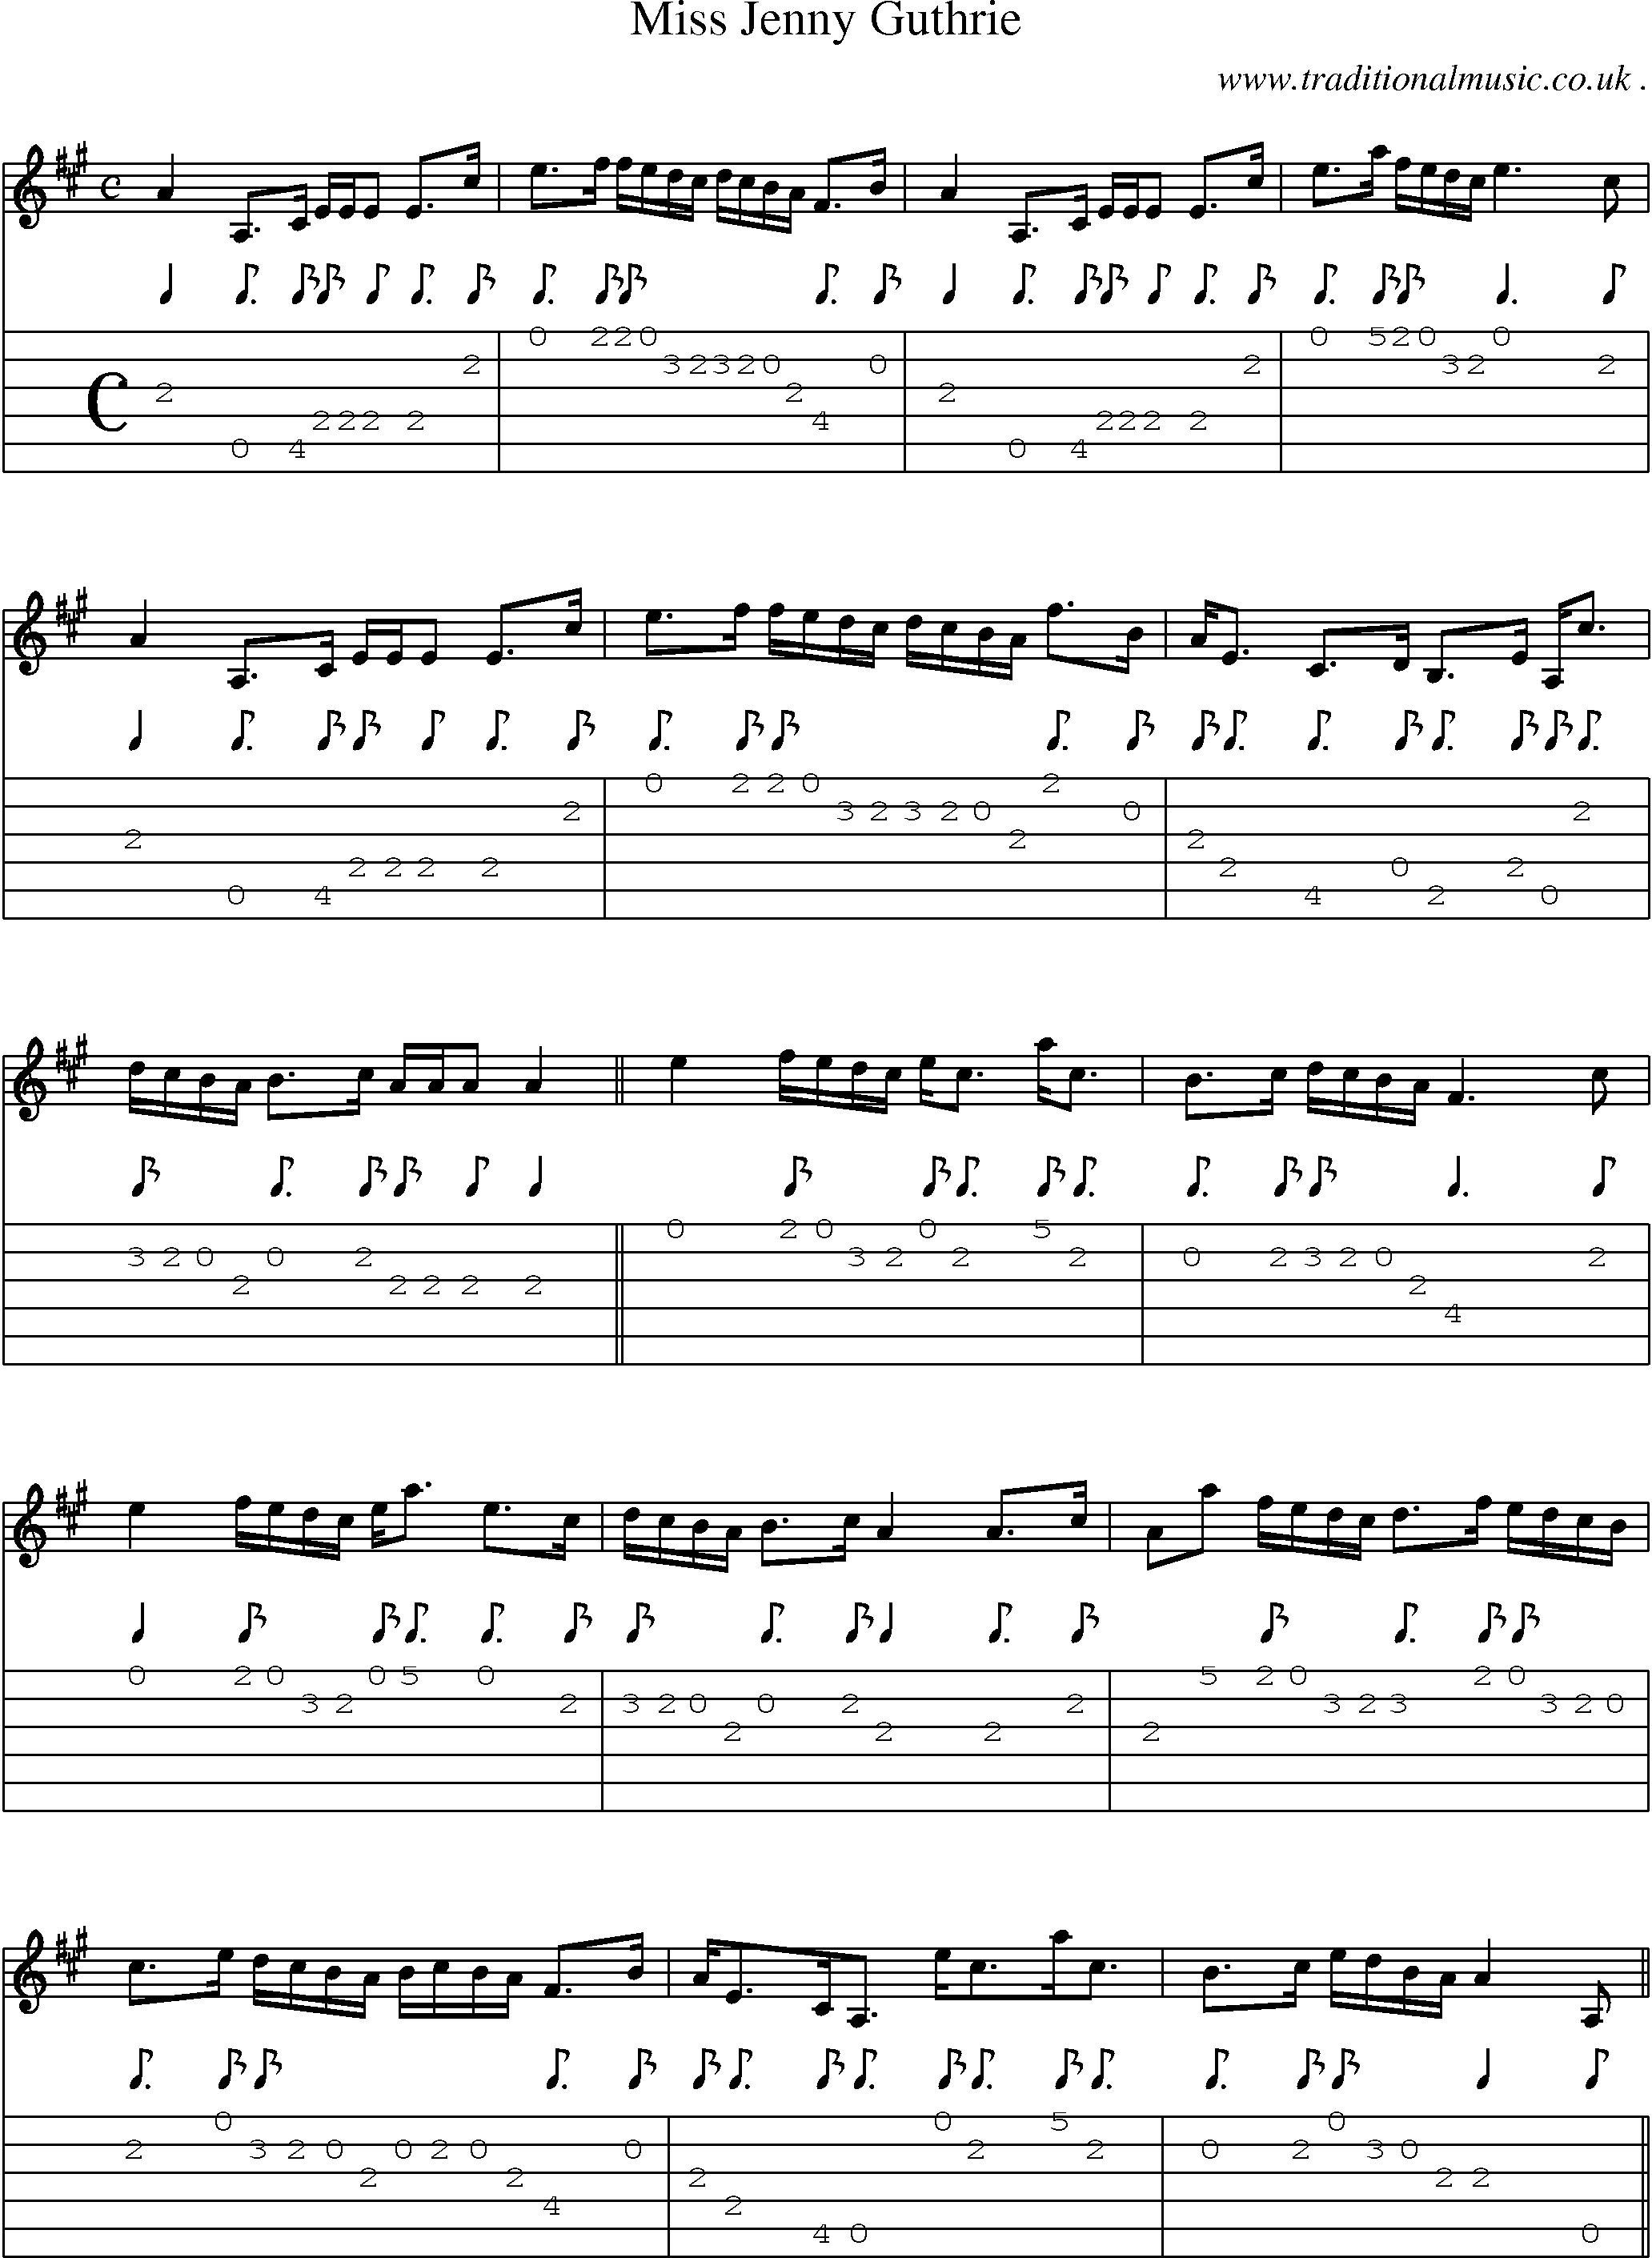 Sheet-music  score, Chords and Guitar Tabs for Miss Jenny Guthrie